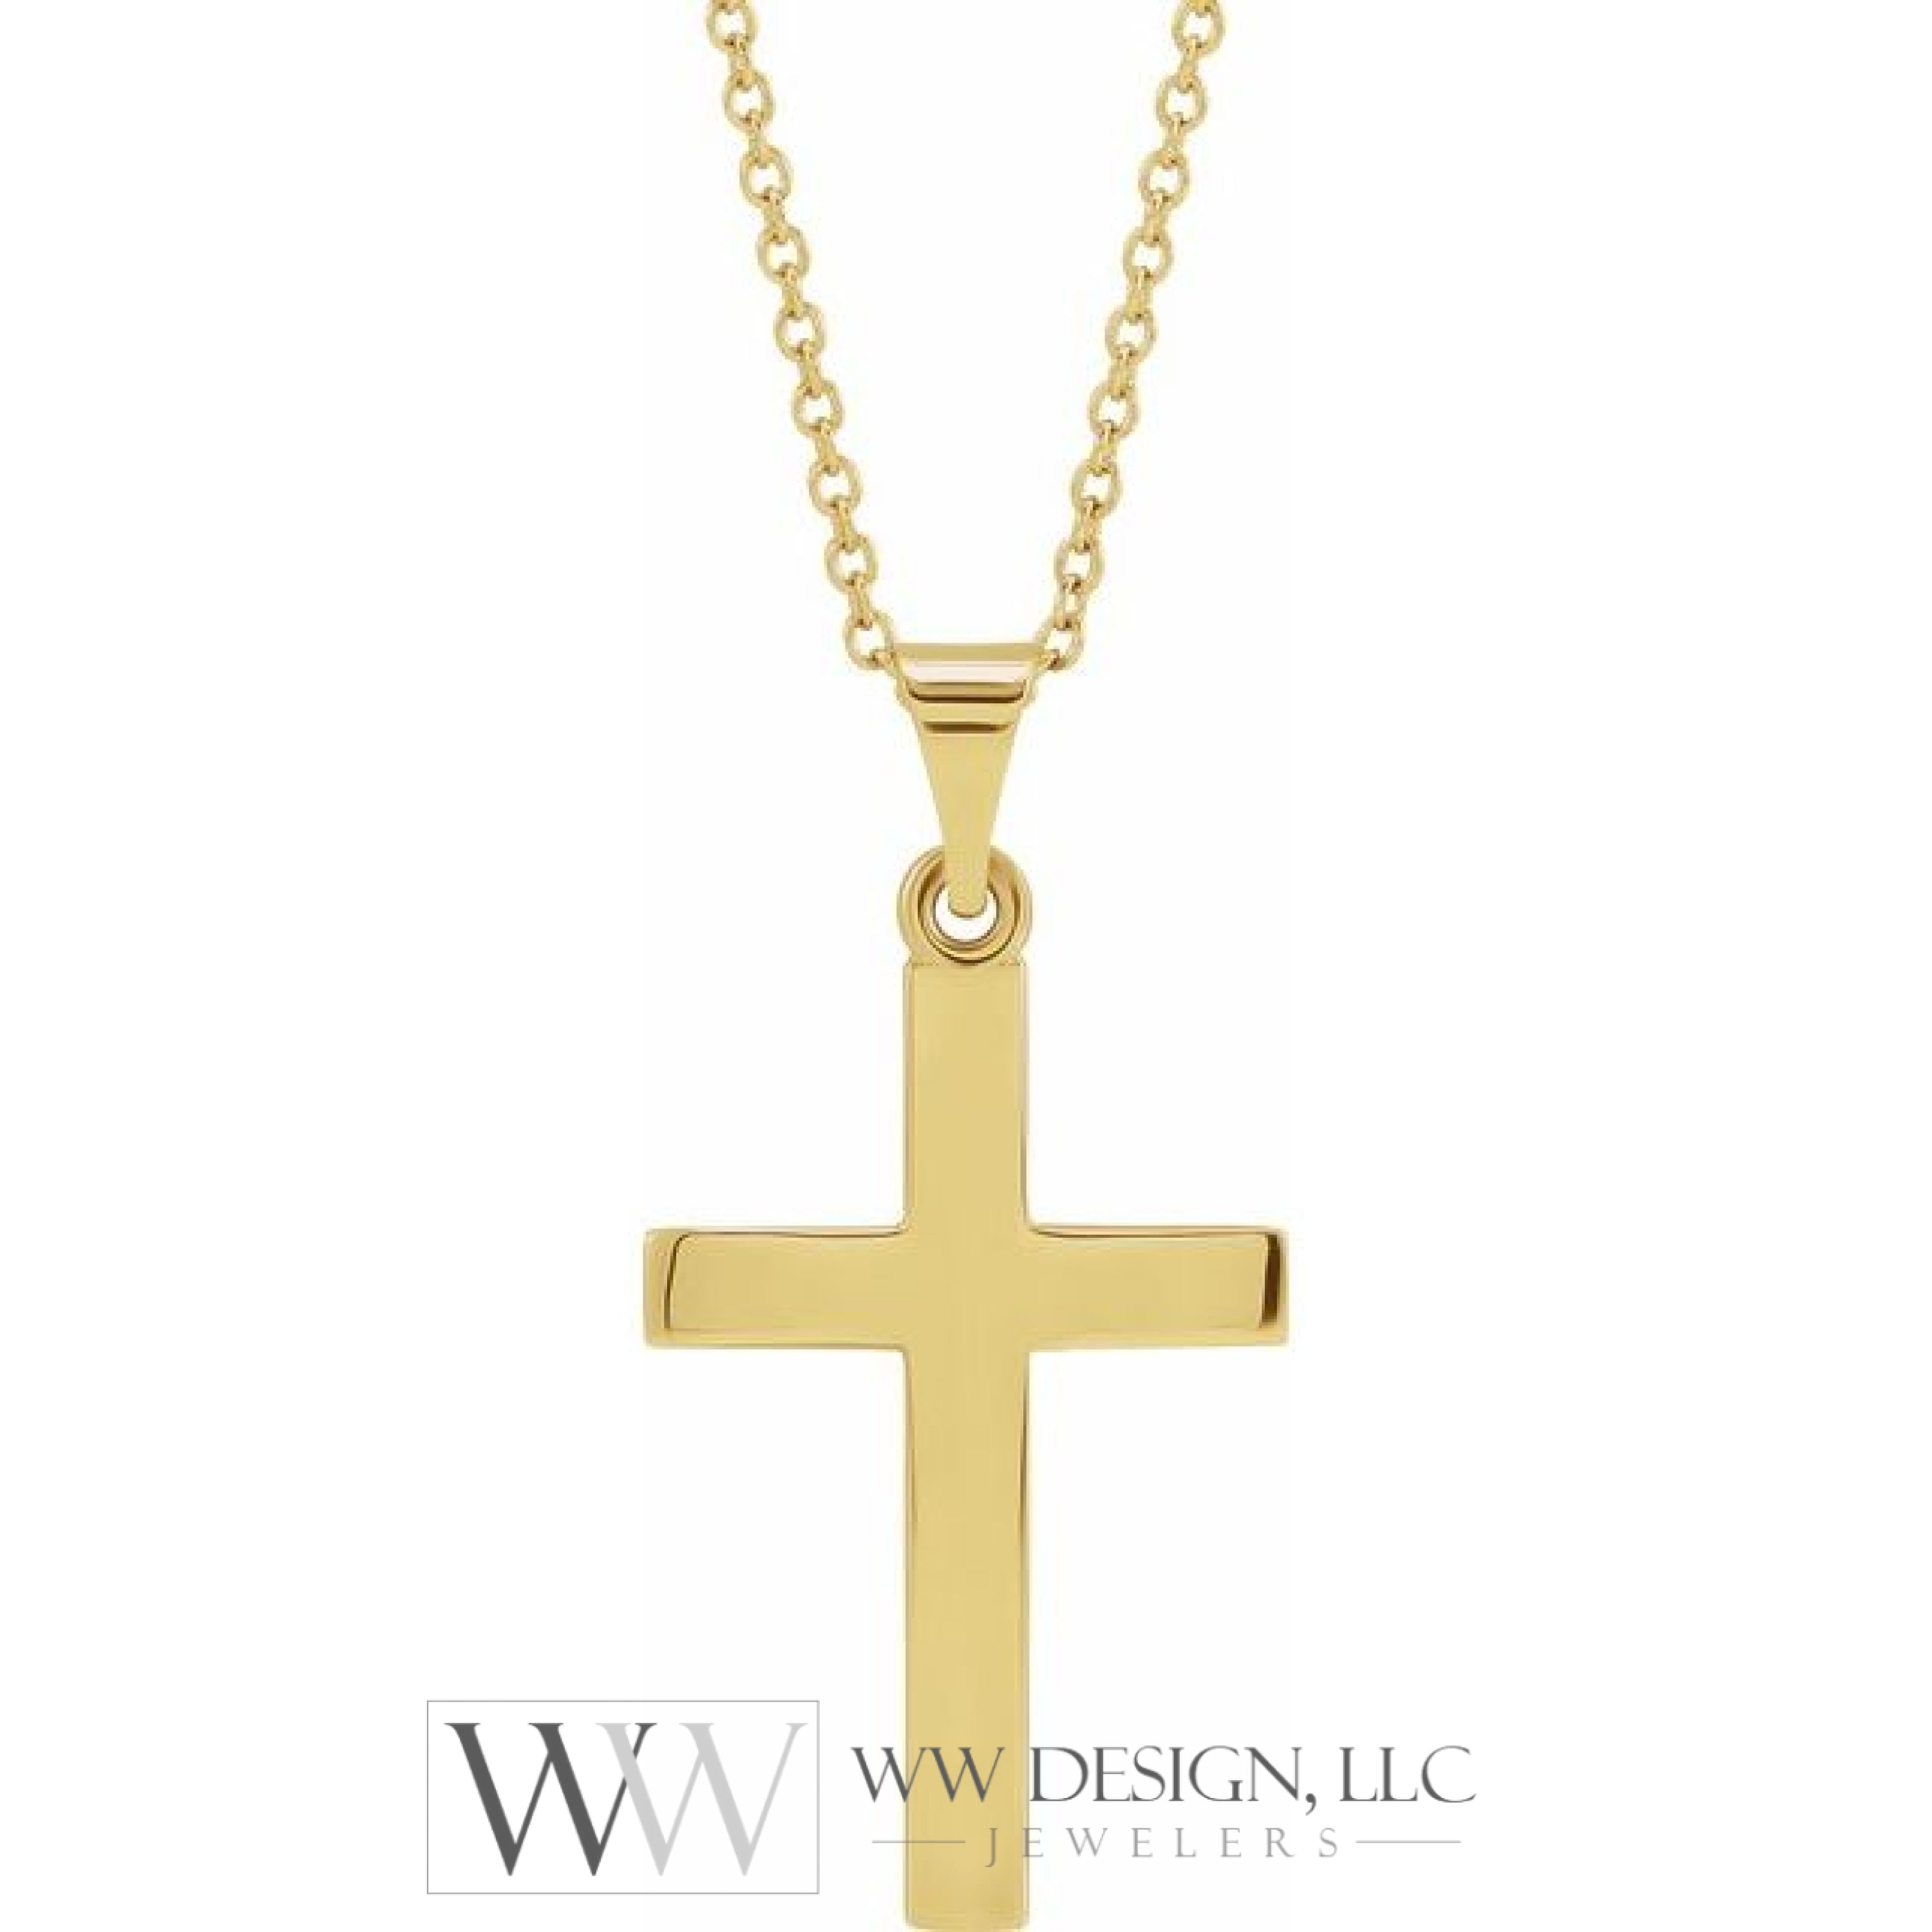 20mm x 13.7mm Cross 18" Necklace - 14K Gold (Y, W, or R), or Sterling Silver